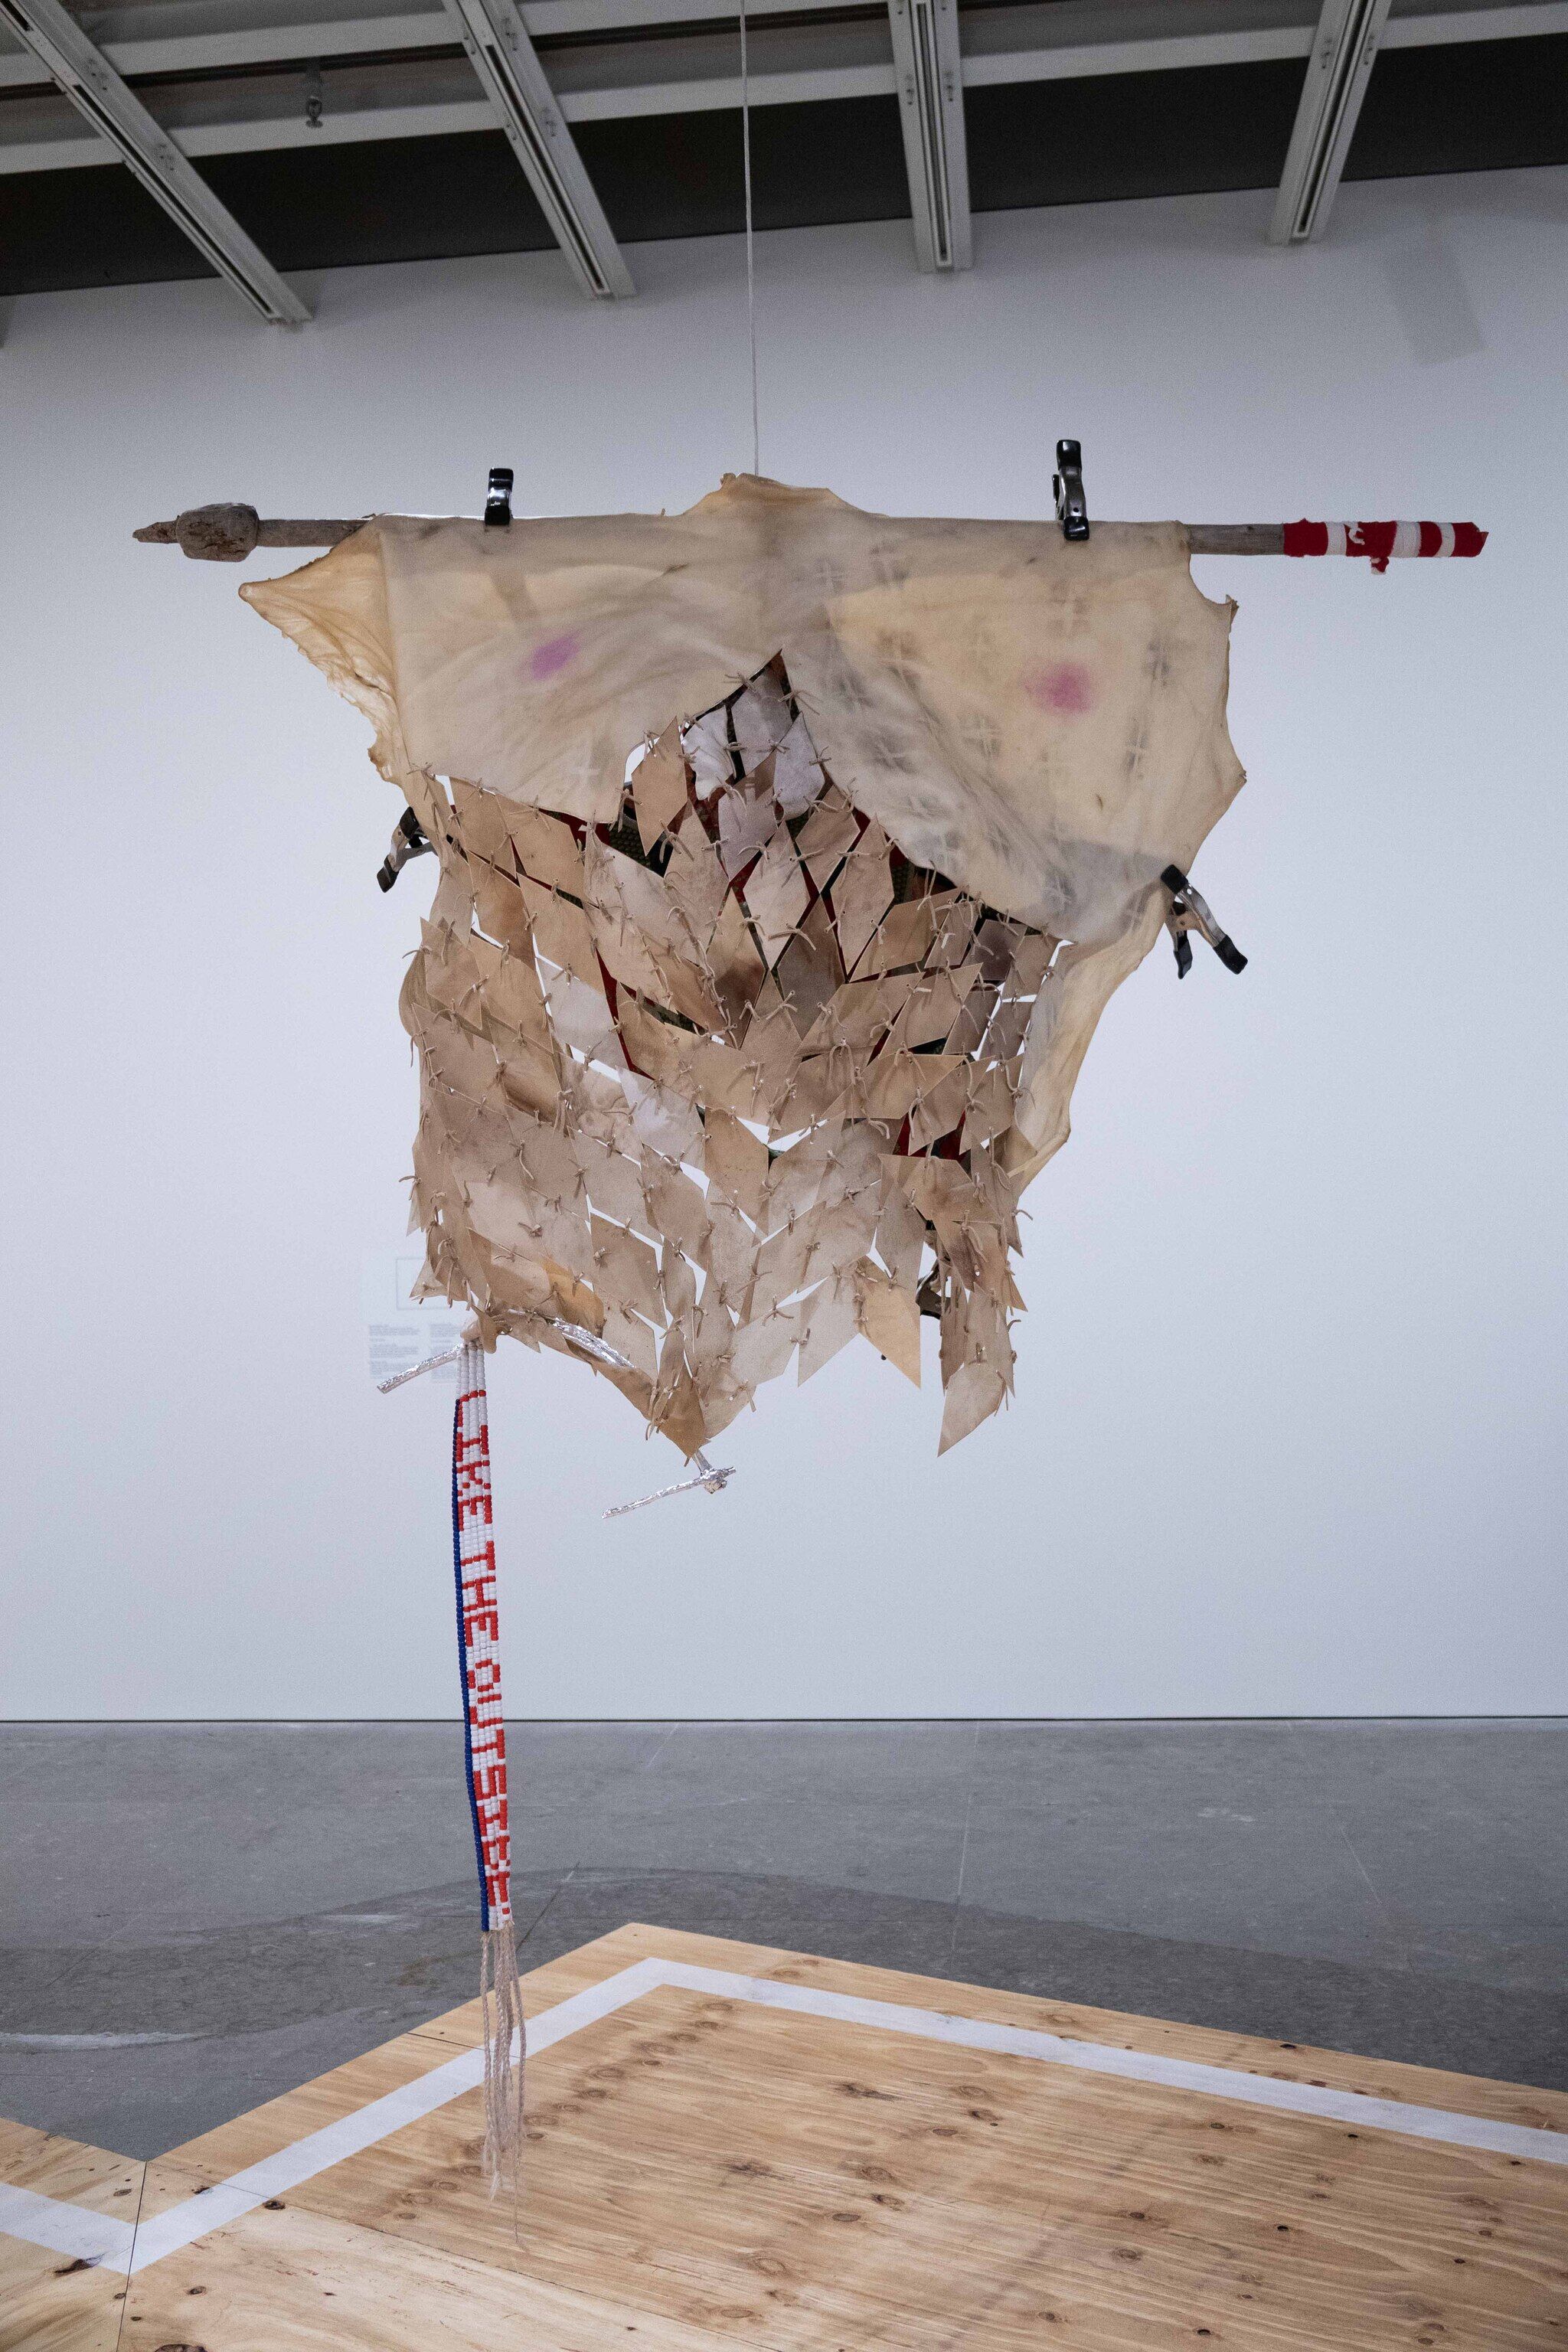 This work features a hanging assemblage of elk rawhide, cotton, newspaper, wood, leather, plastic beads, willow branches, artificial hair, aluminum foil, chalk, metal clamps, rope, makeup, and graphite, suspended in the air. 